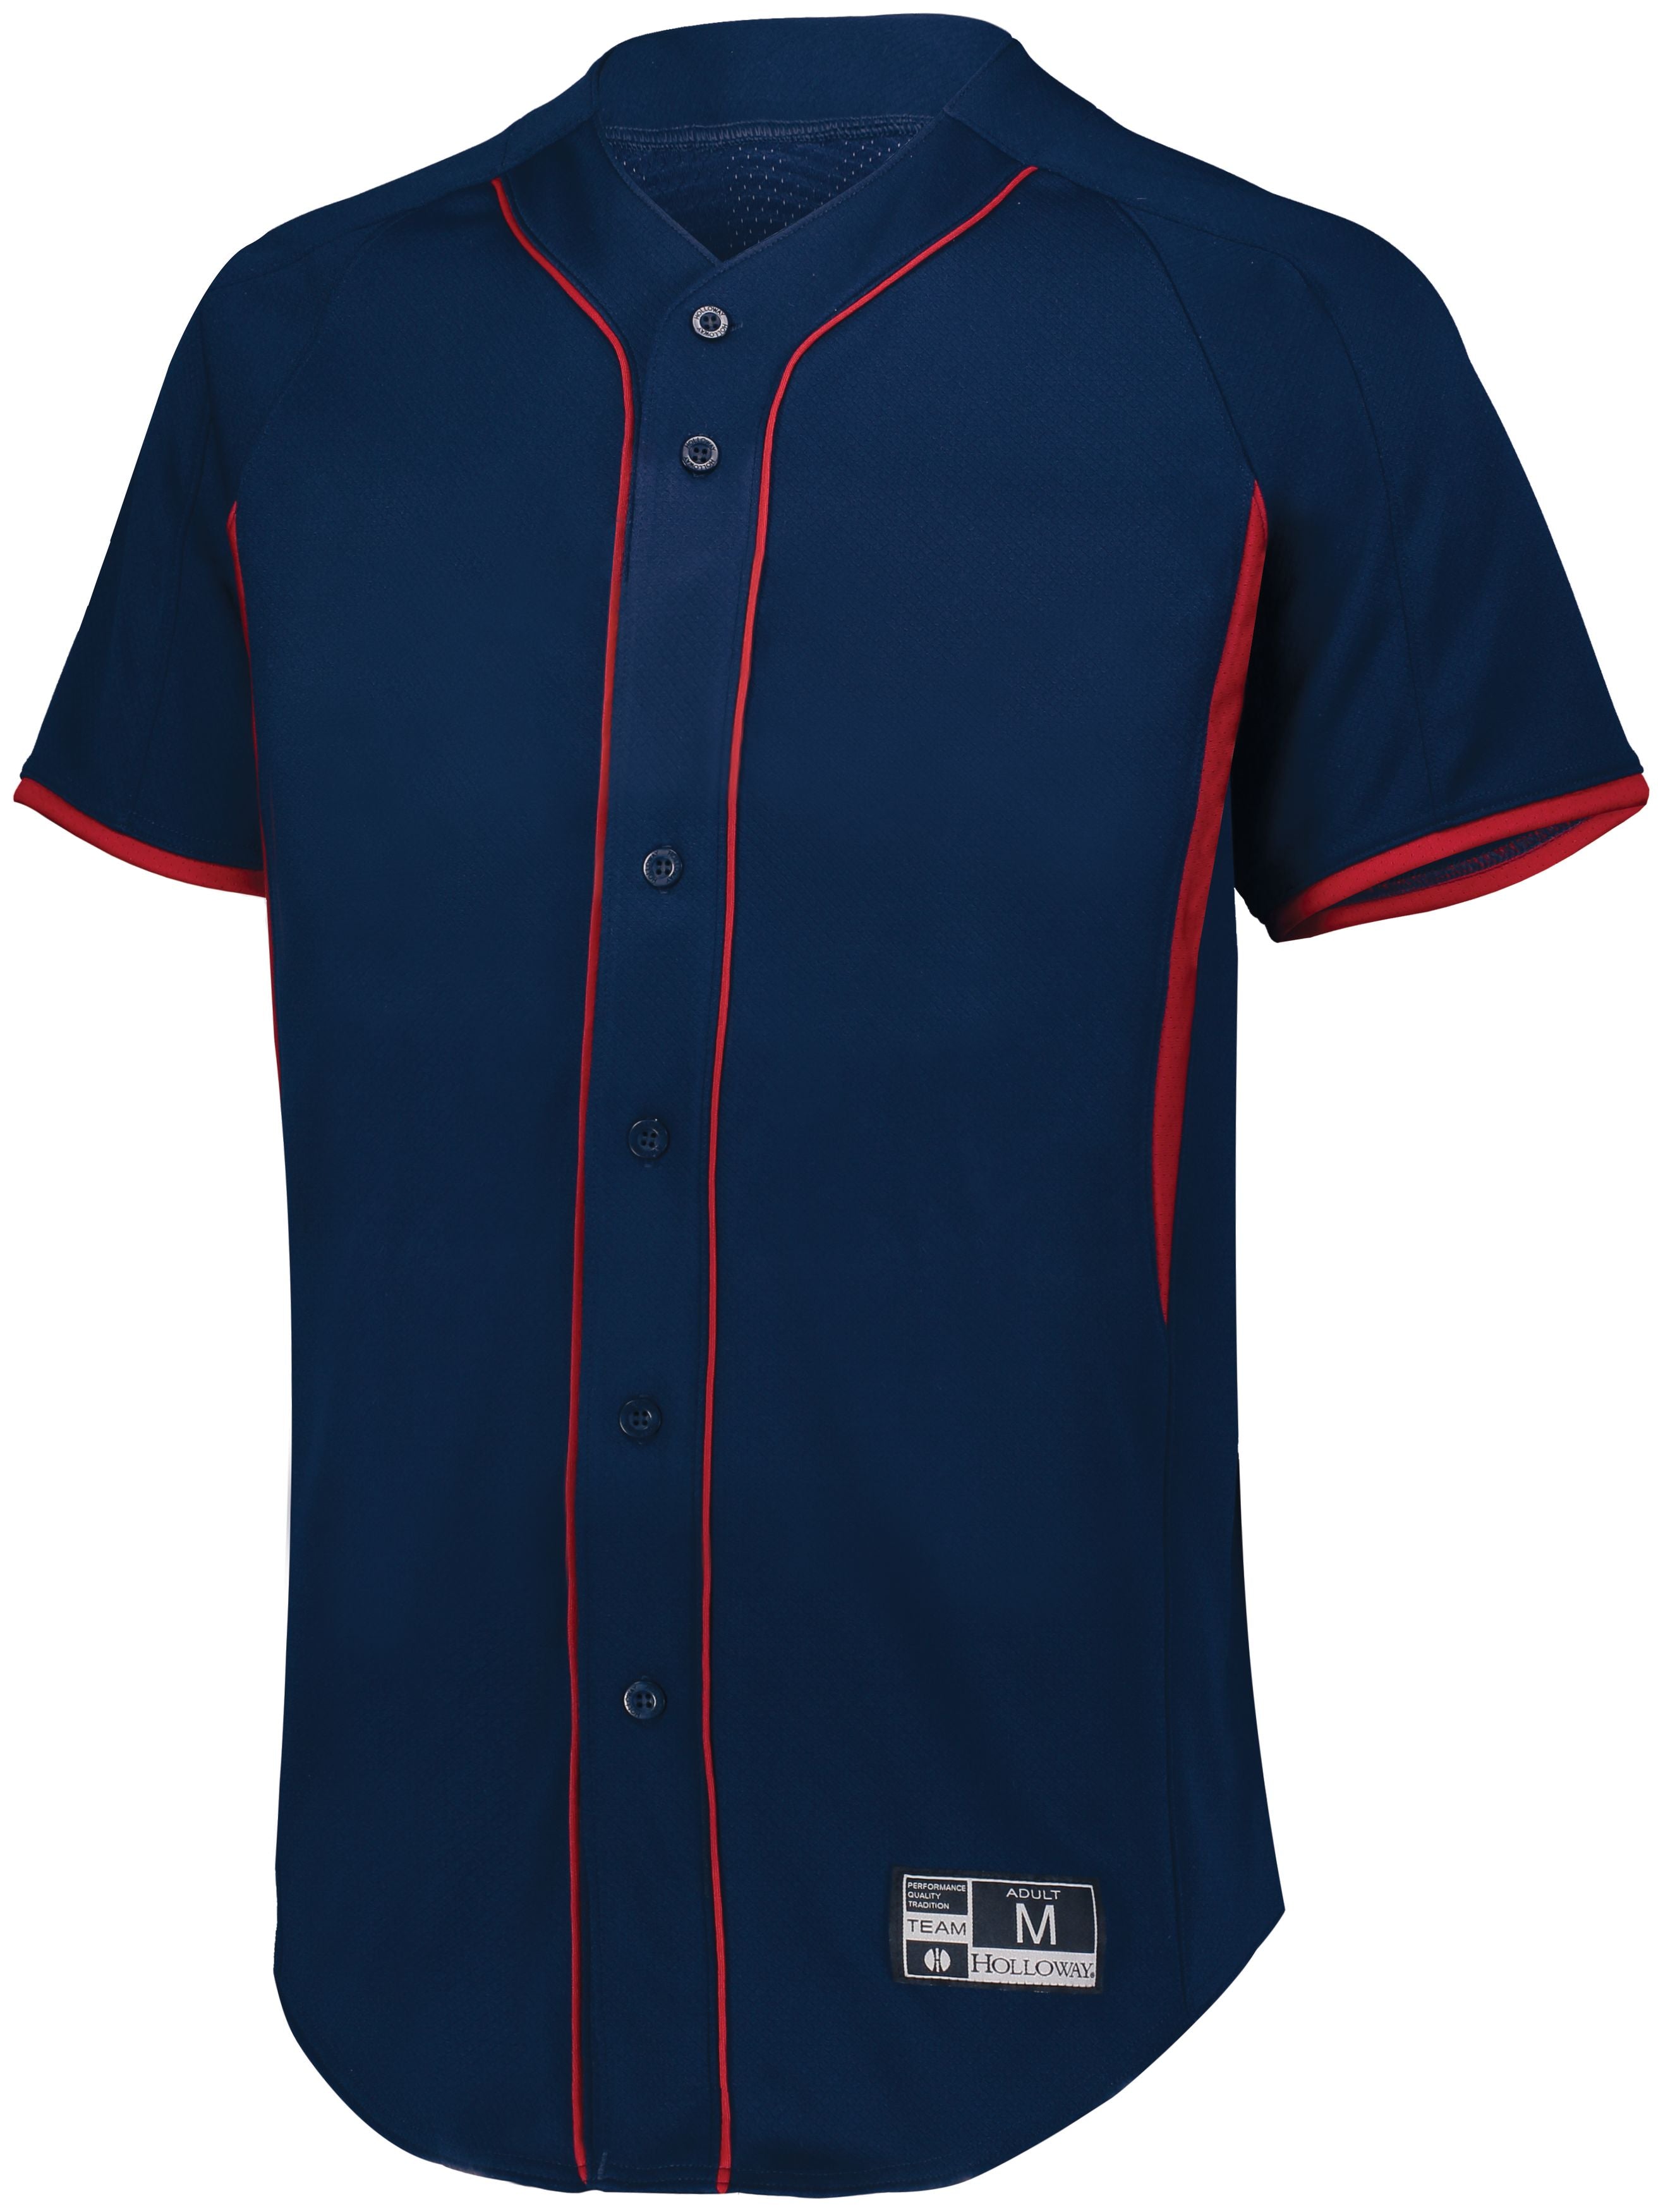 Holloway Game7 Full-Button Baseball Jersey in Navy/Scarlet  -Part of the Adult, Adult-Jersey, Baseball, Holloway, Shirts, All-Sports, All-Sports-1 product lines at KanaleyCreations.com